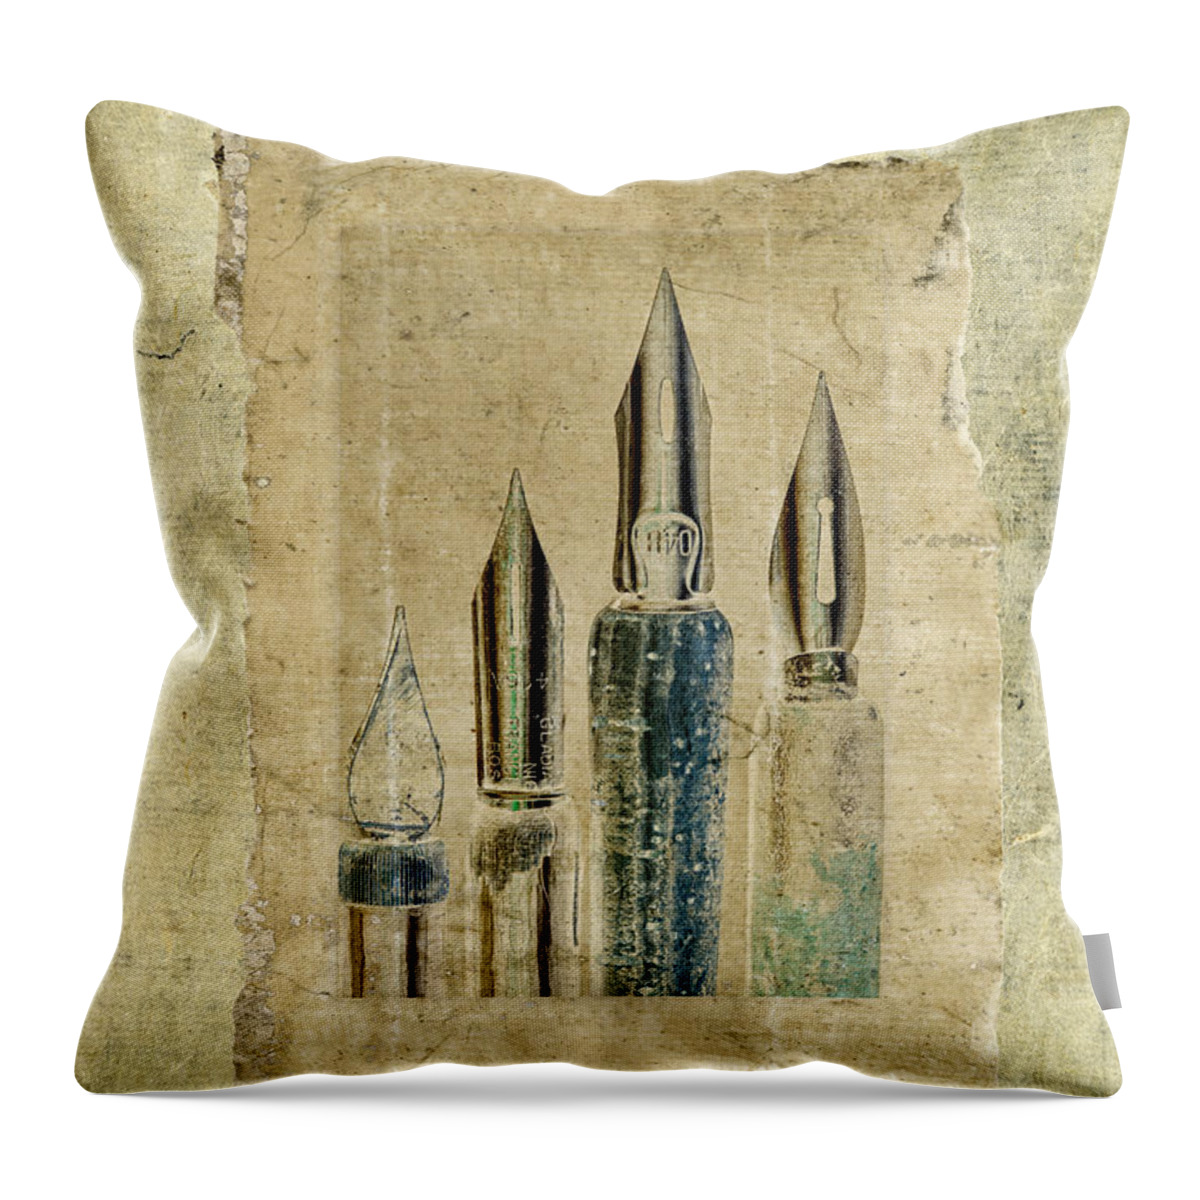 Pens Throw Pillow featuring the photograph Old Pens Old Papers by Carol Leigh